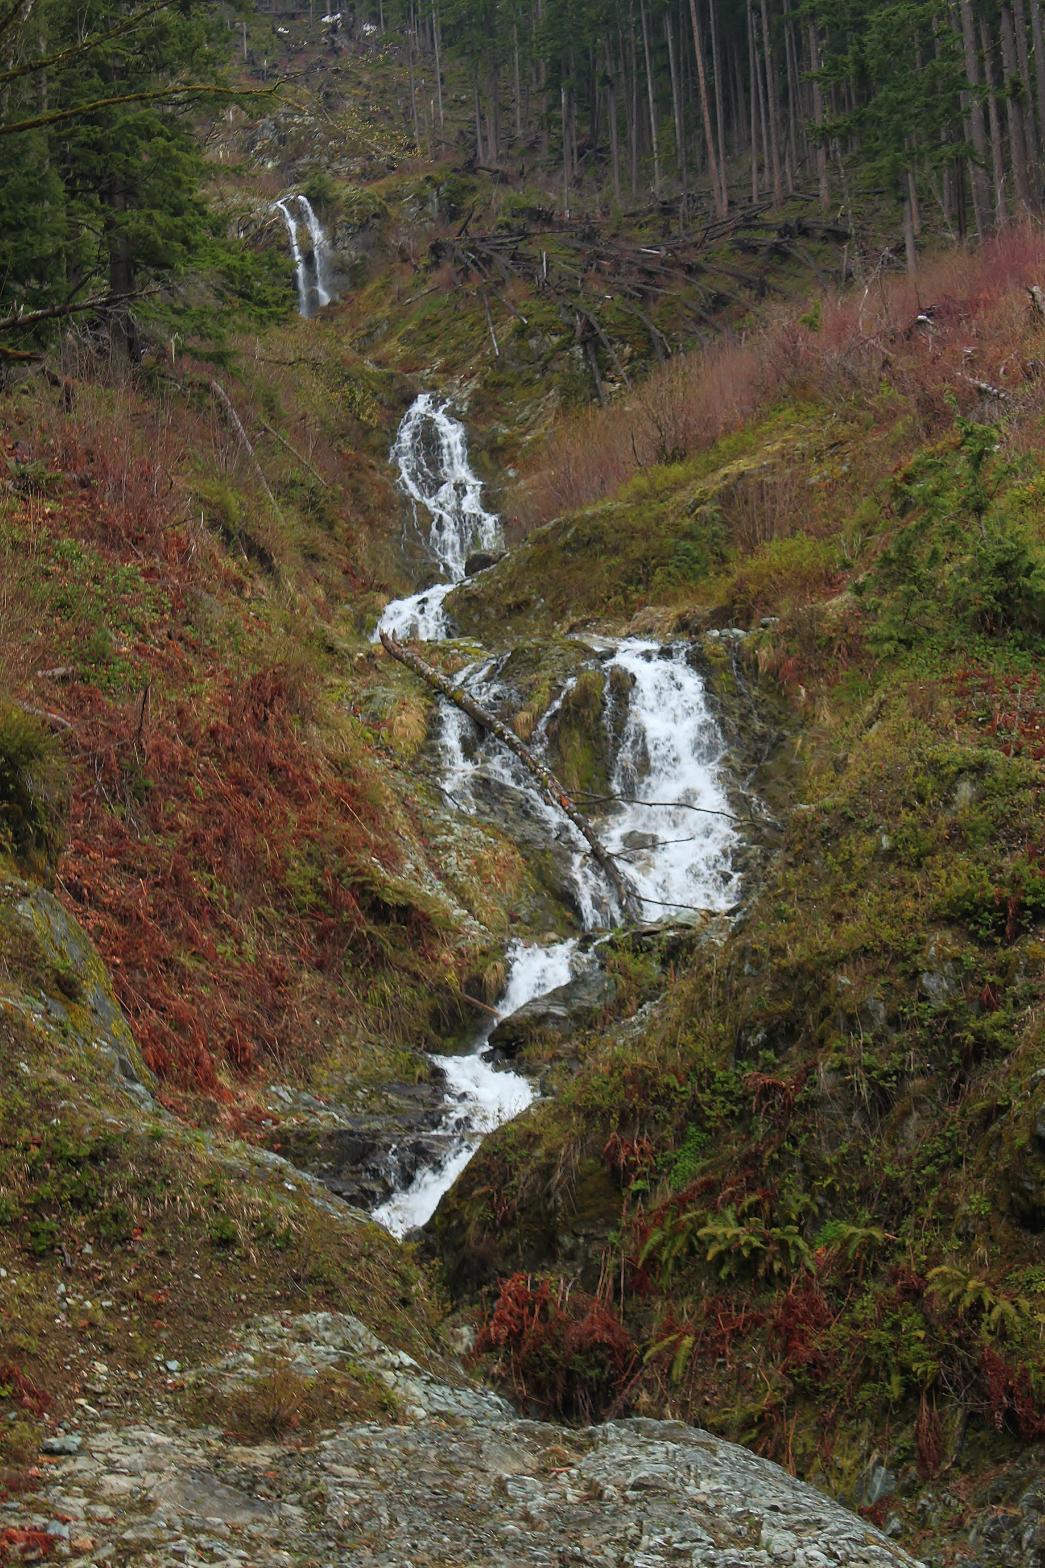 Upper section of the falls